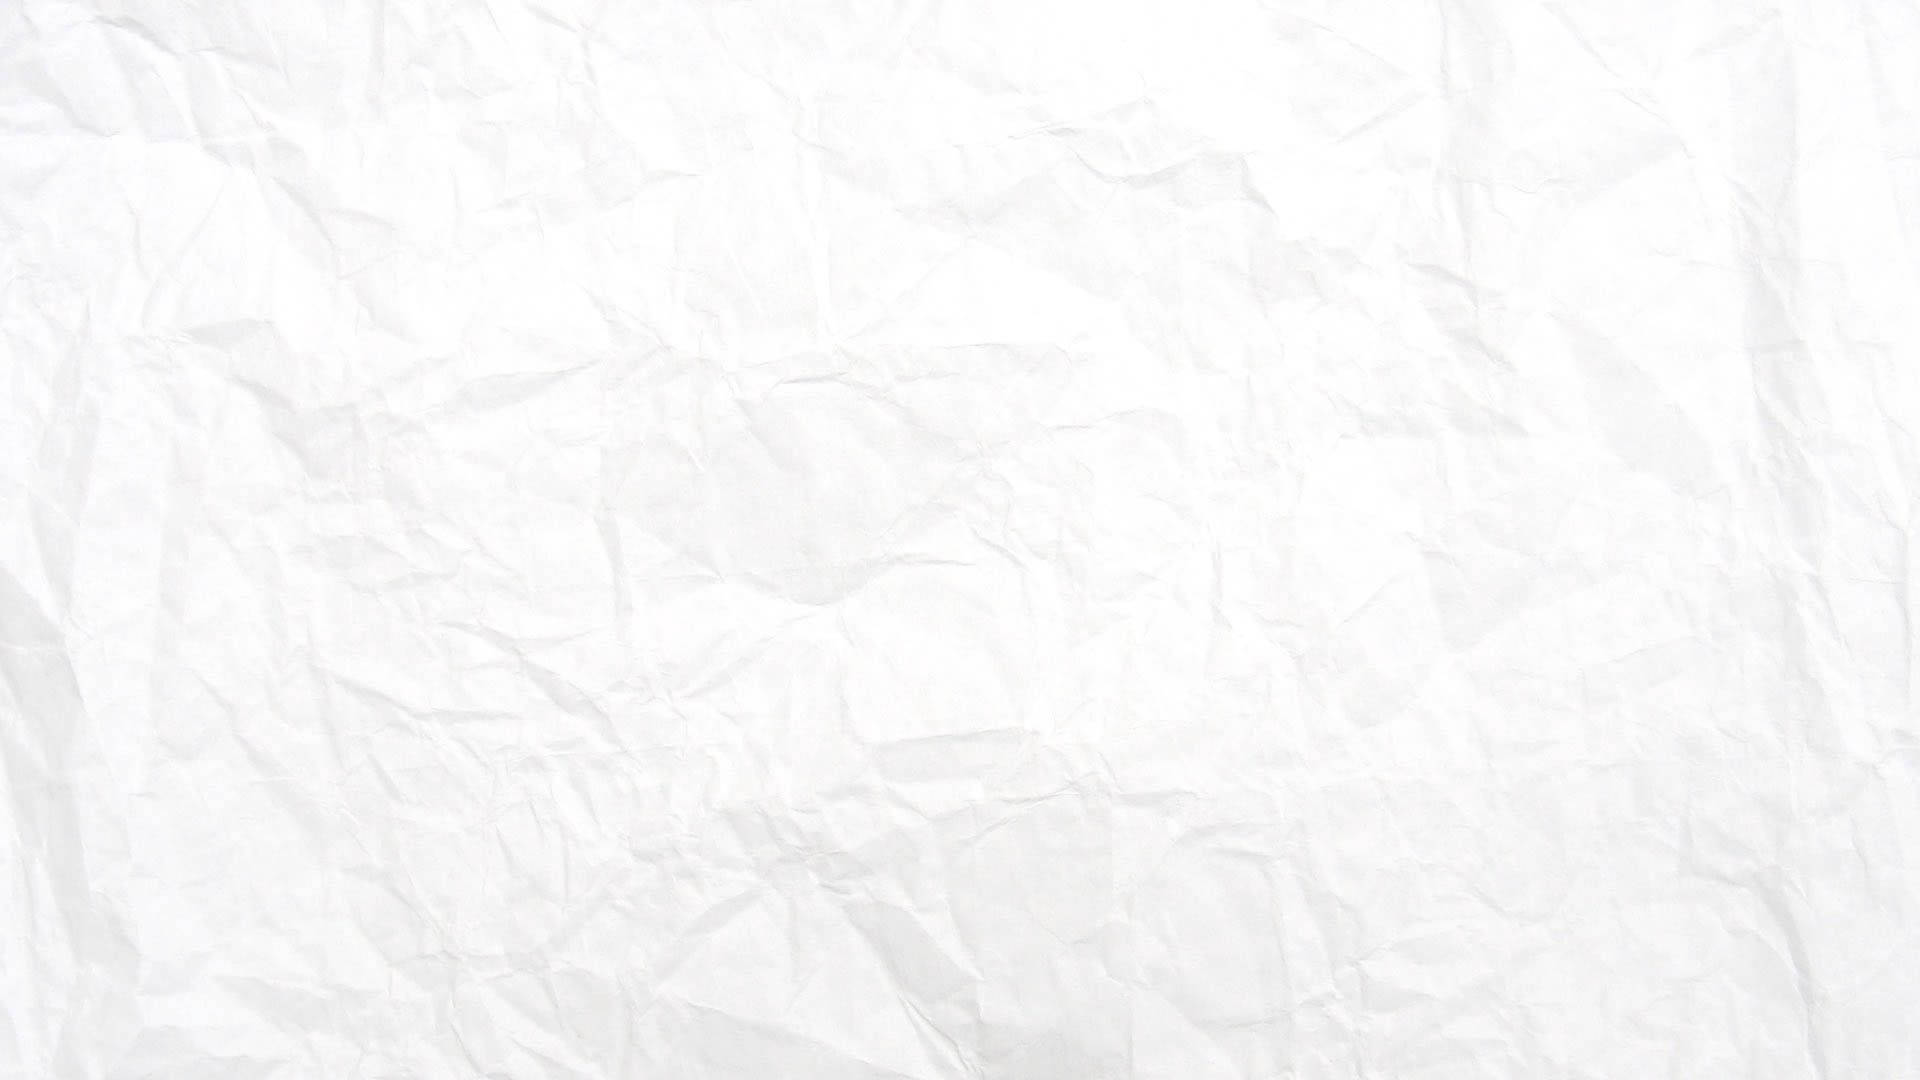 Blank White Crumpled Paper Wallpaper